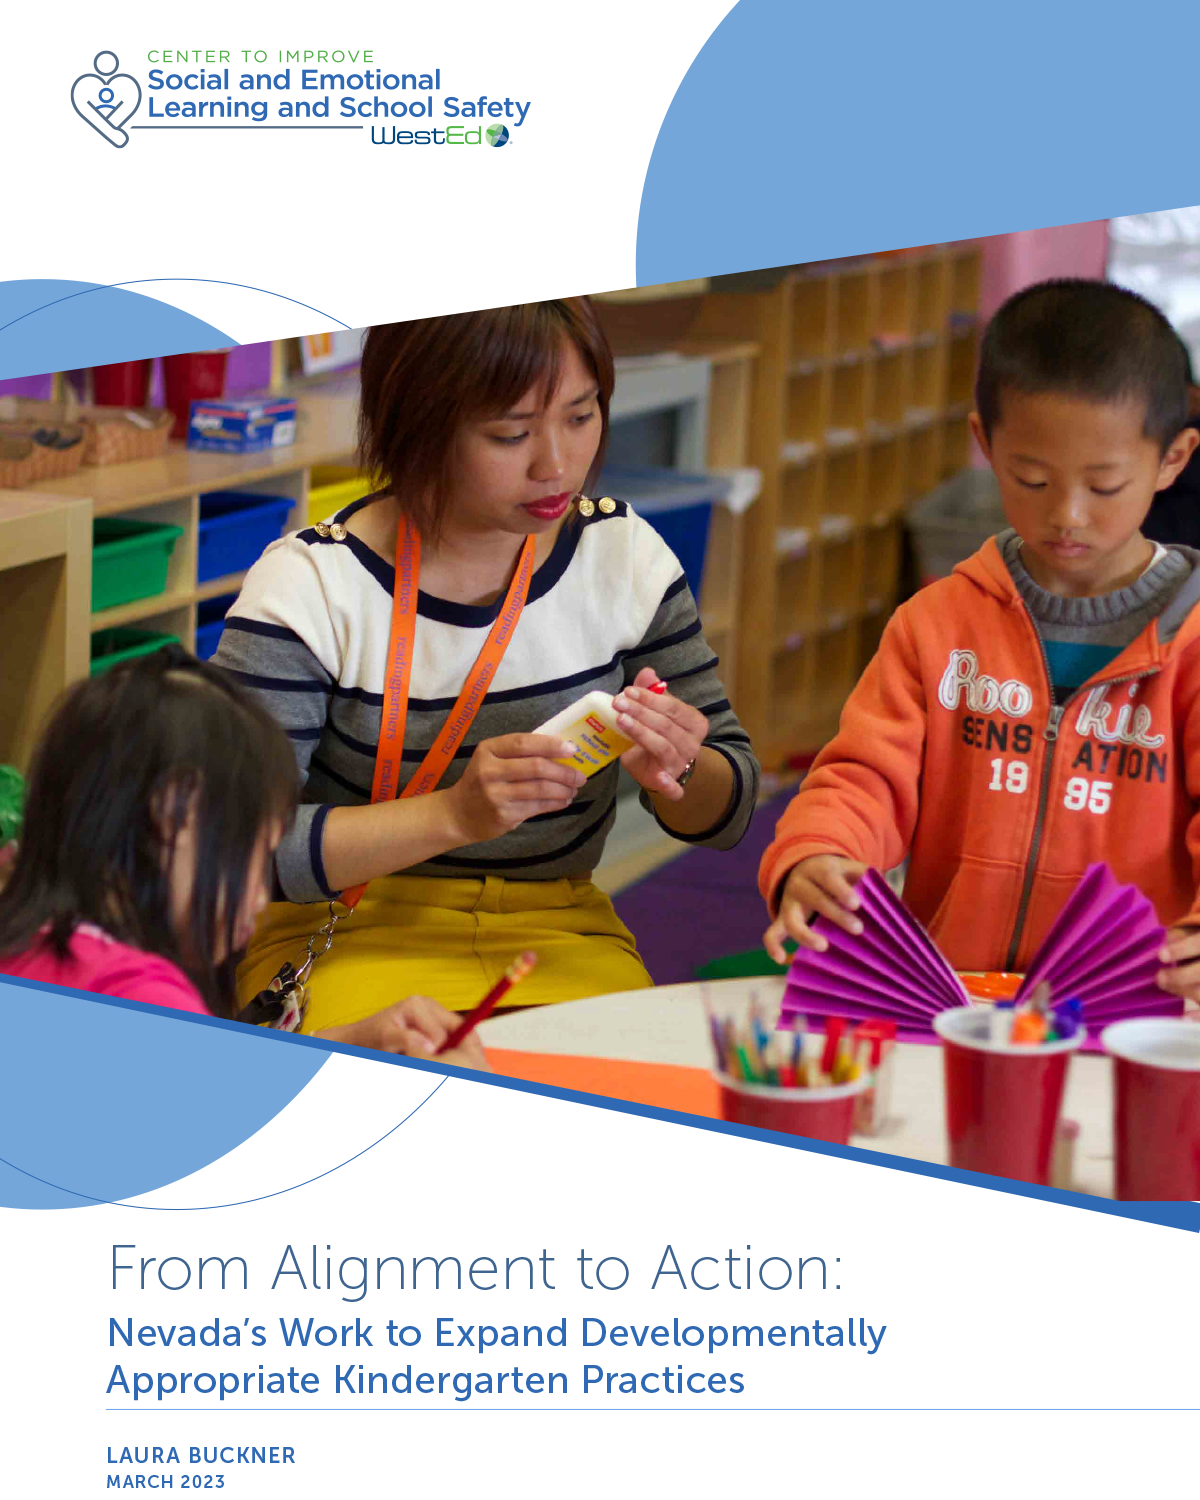 From Alignment to Action: Nevada's Work to Expand Developmentally Appropriate Kindergarten Practices